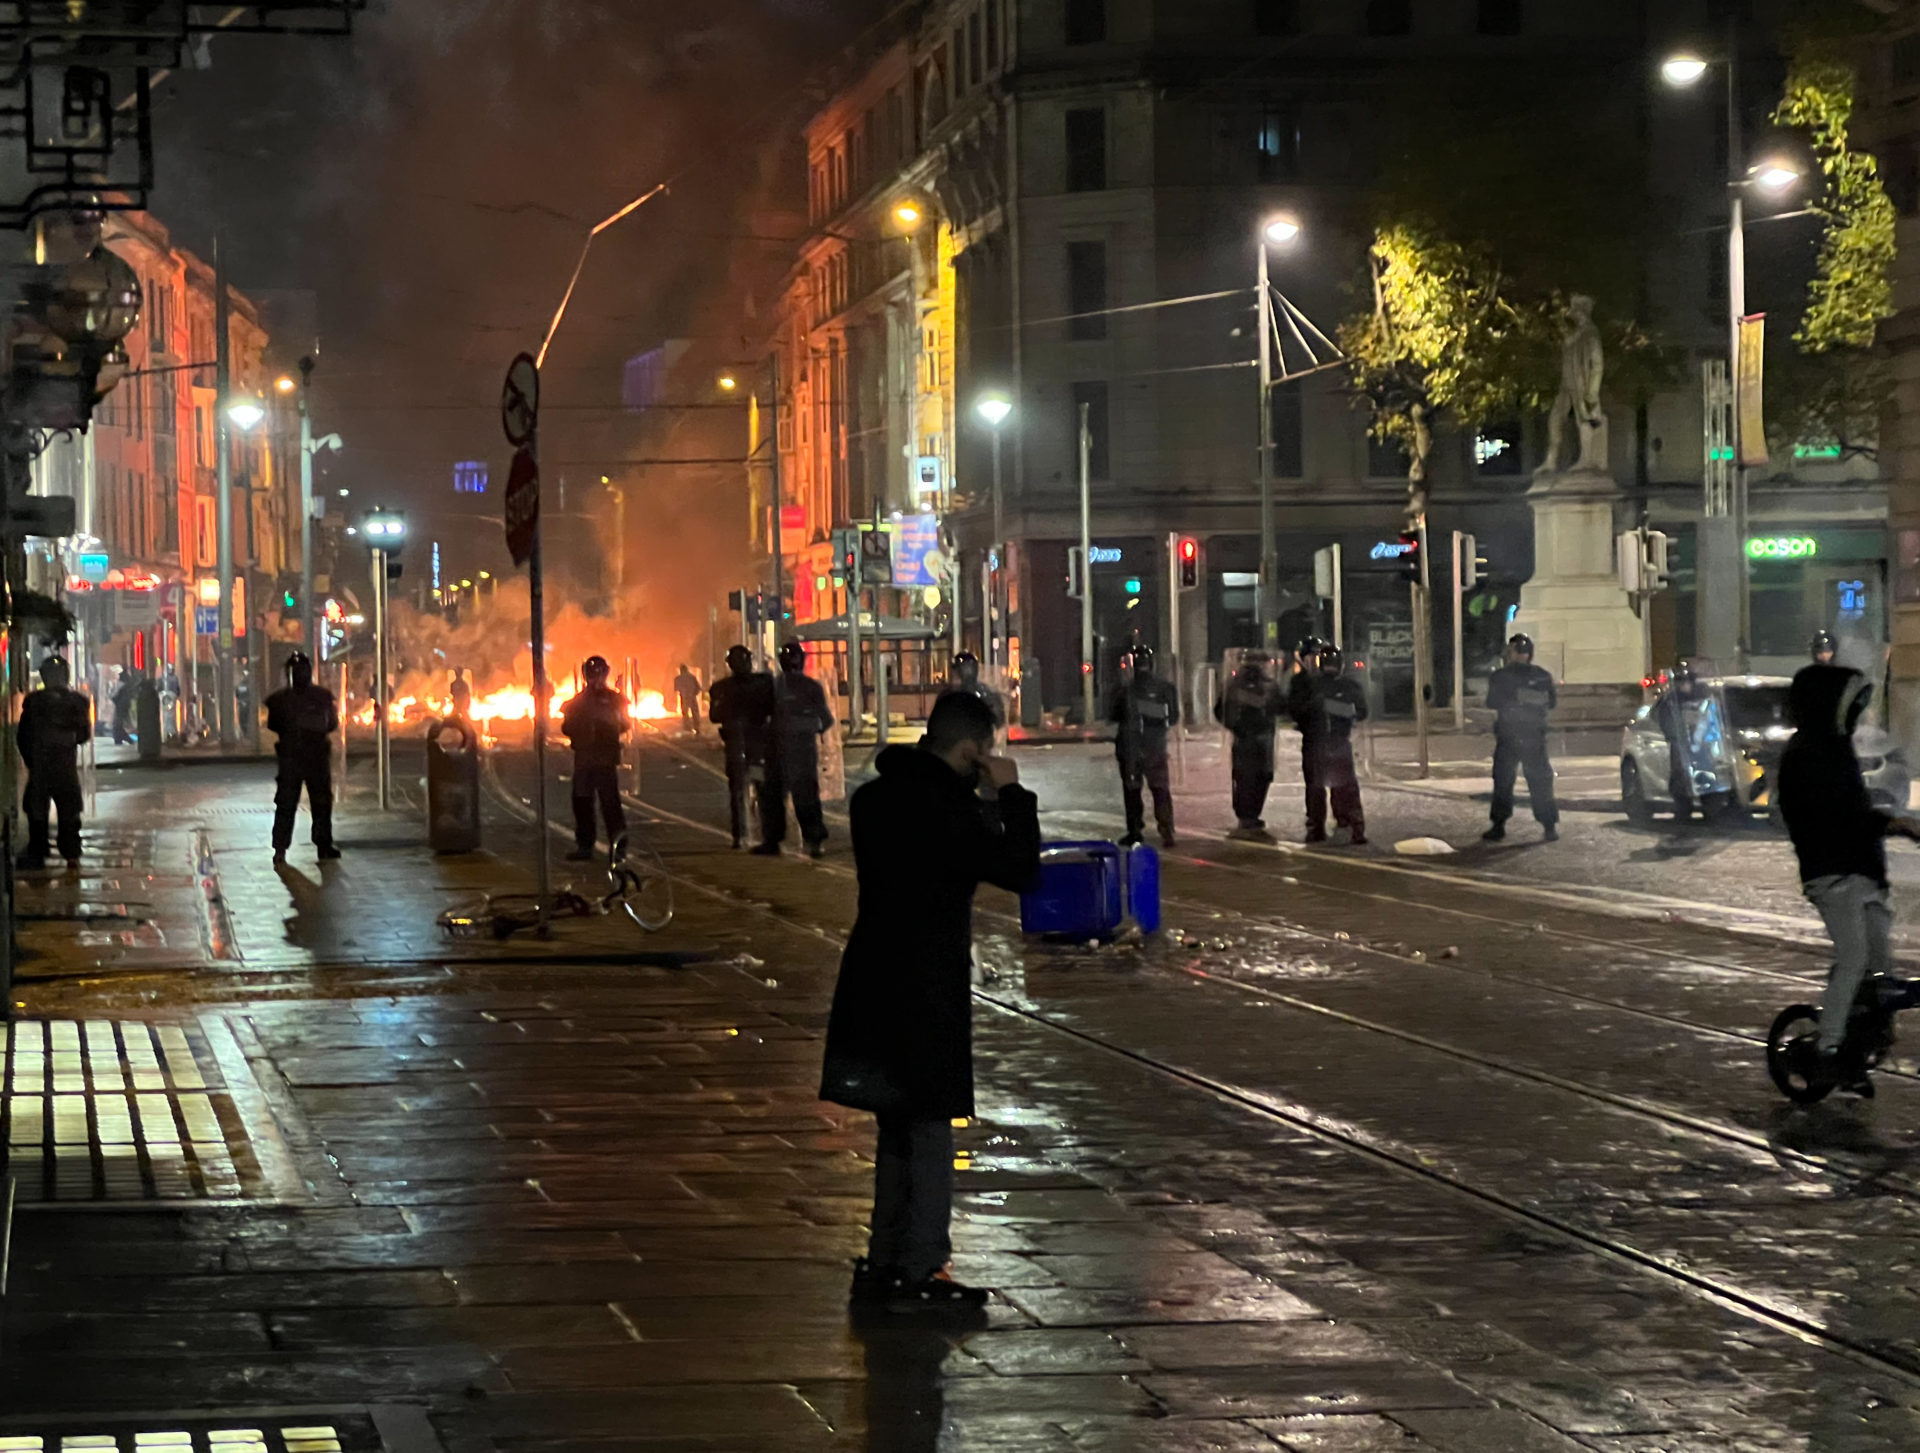 Gardaí in Dublin city centre as rioter set fire and cause massive public damage